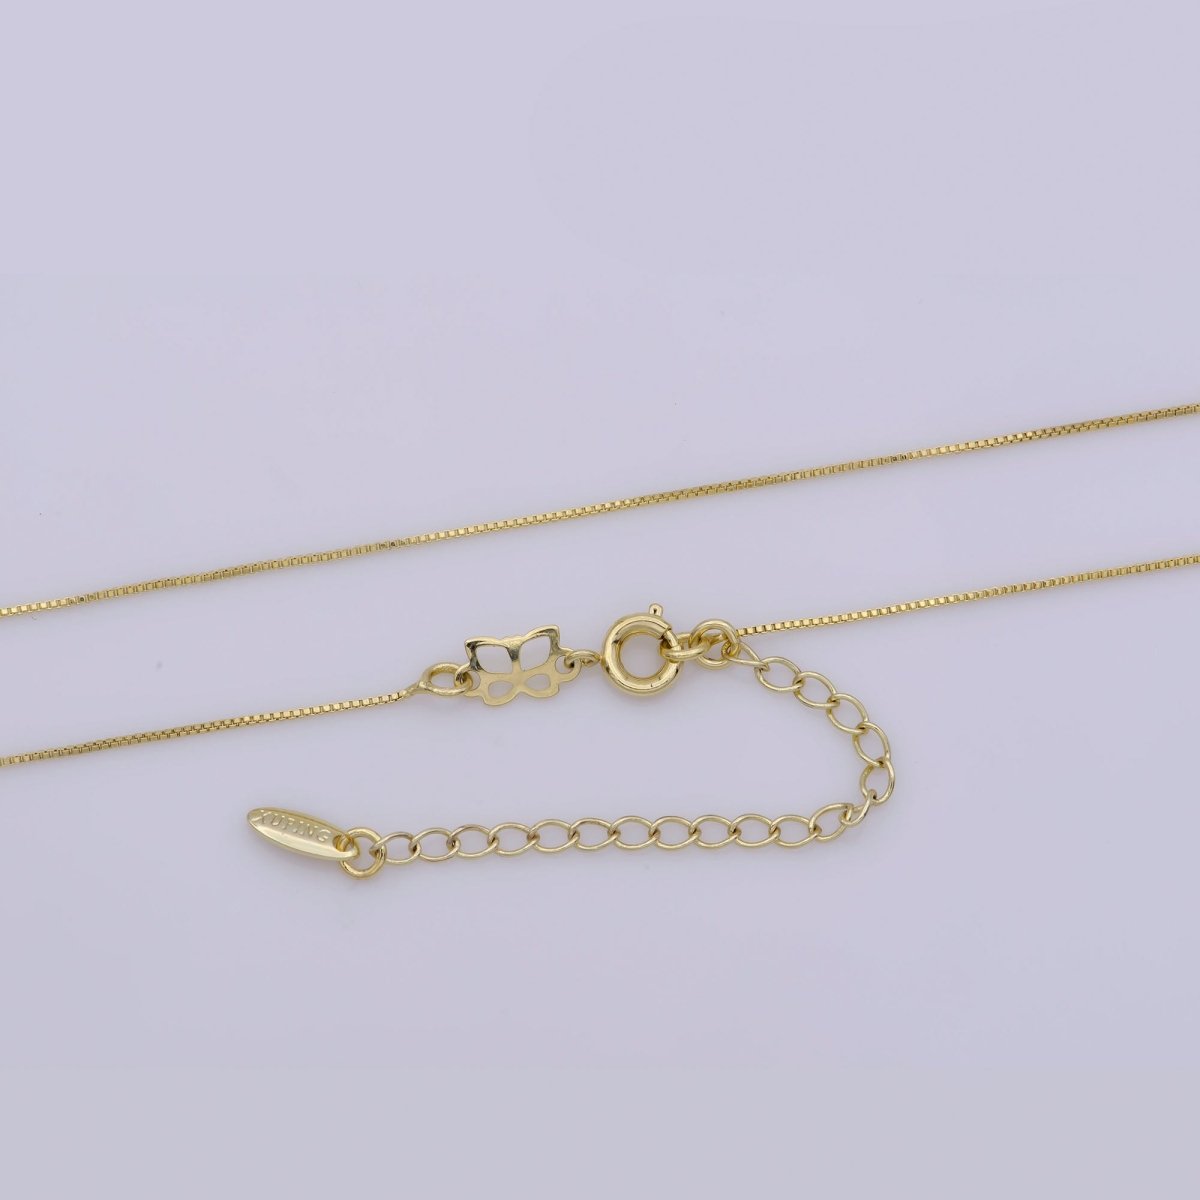 OS 14K Gold Filled 0.5mm Dainty Box 16 Inch Choker Chain Necklace w. Extender | WA-283 - DLUXCA